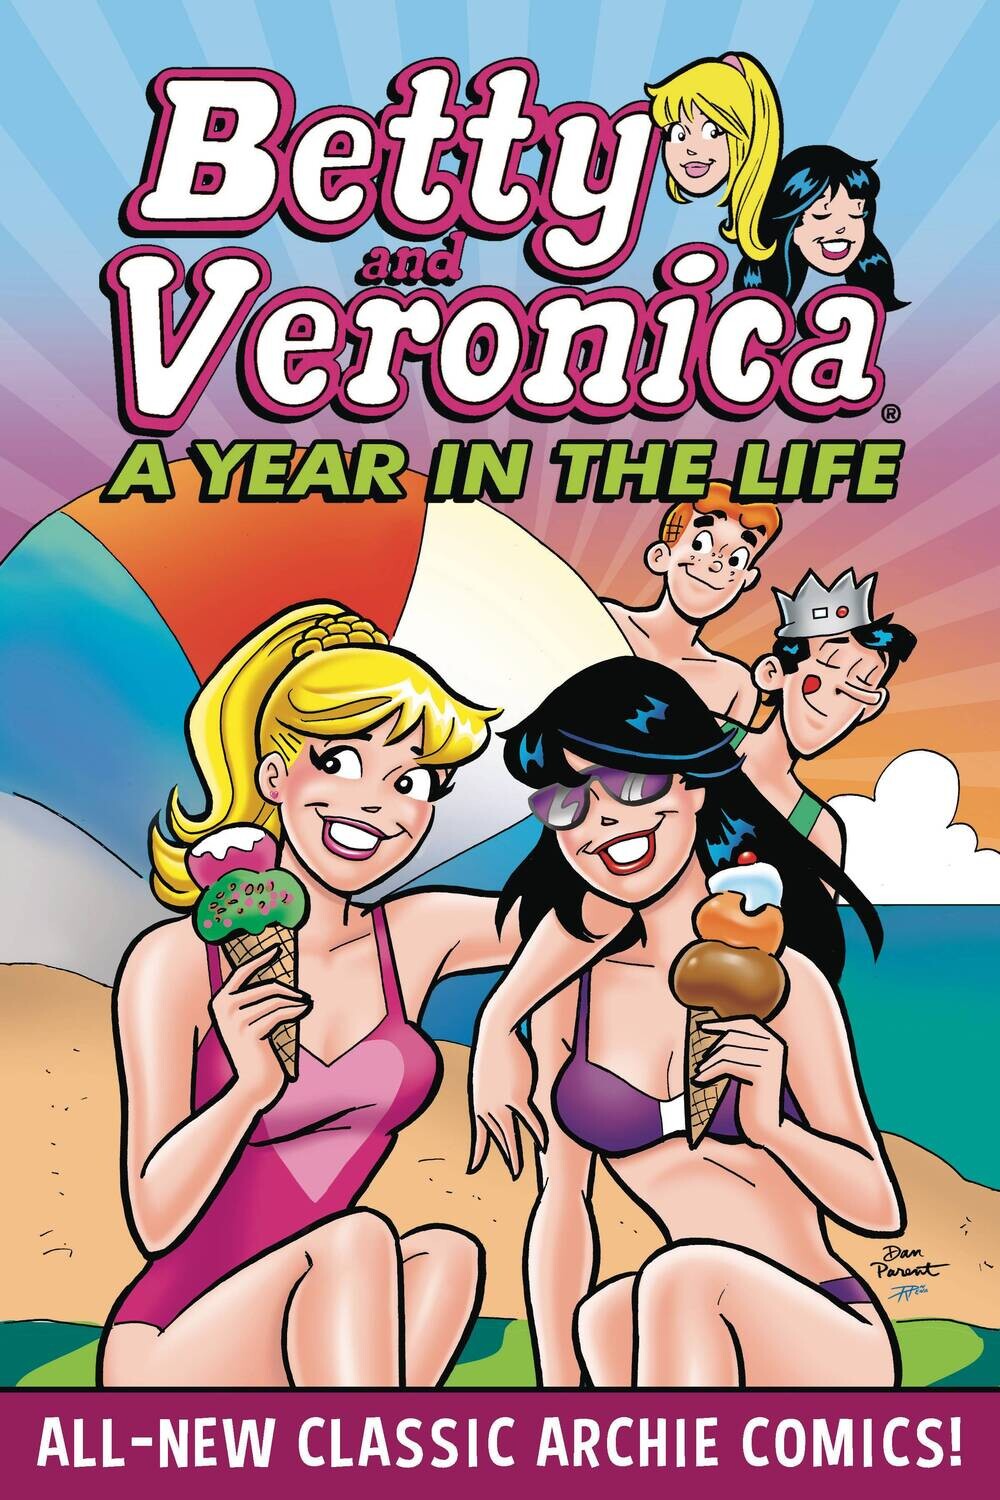 BETTY & VERONICA A YEAR IN THE LIFE TP FOC:6/3/24 Release:6/26/24